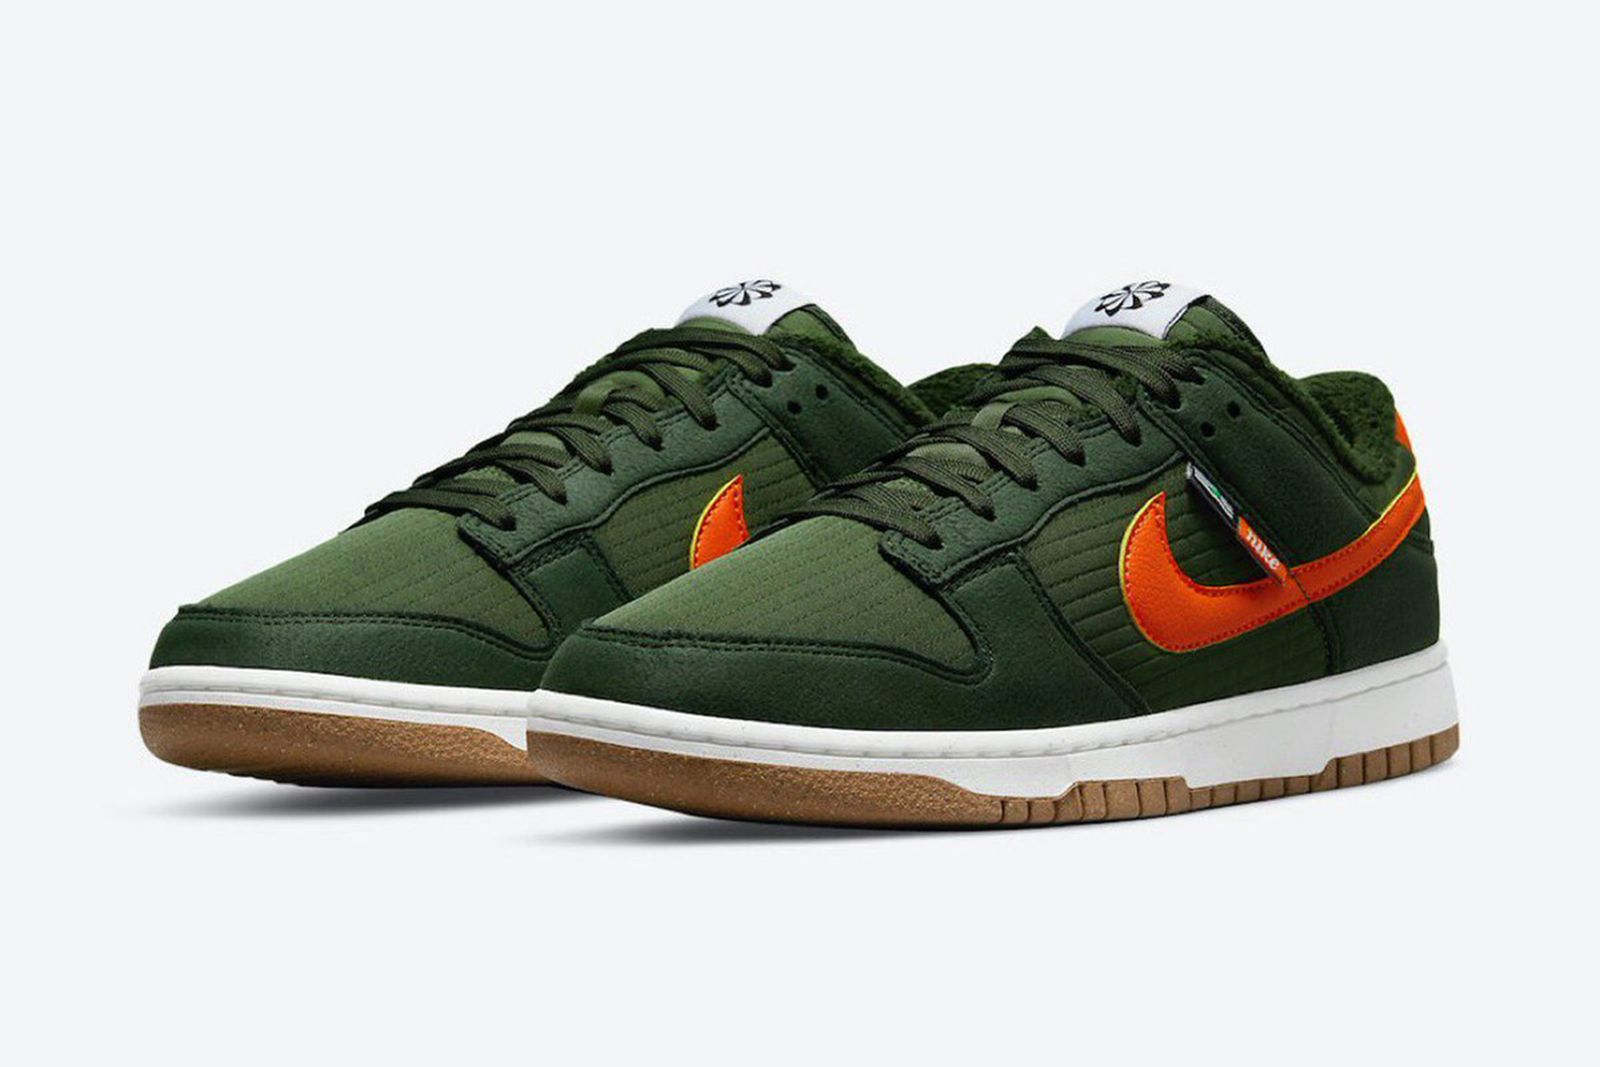 Nike Dunk Low: upcoming nike dunks Upcoming Fall/Winter 2021 Colorways